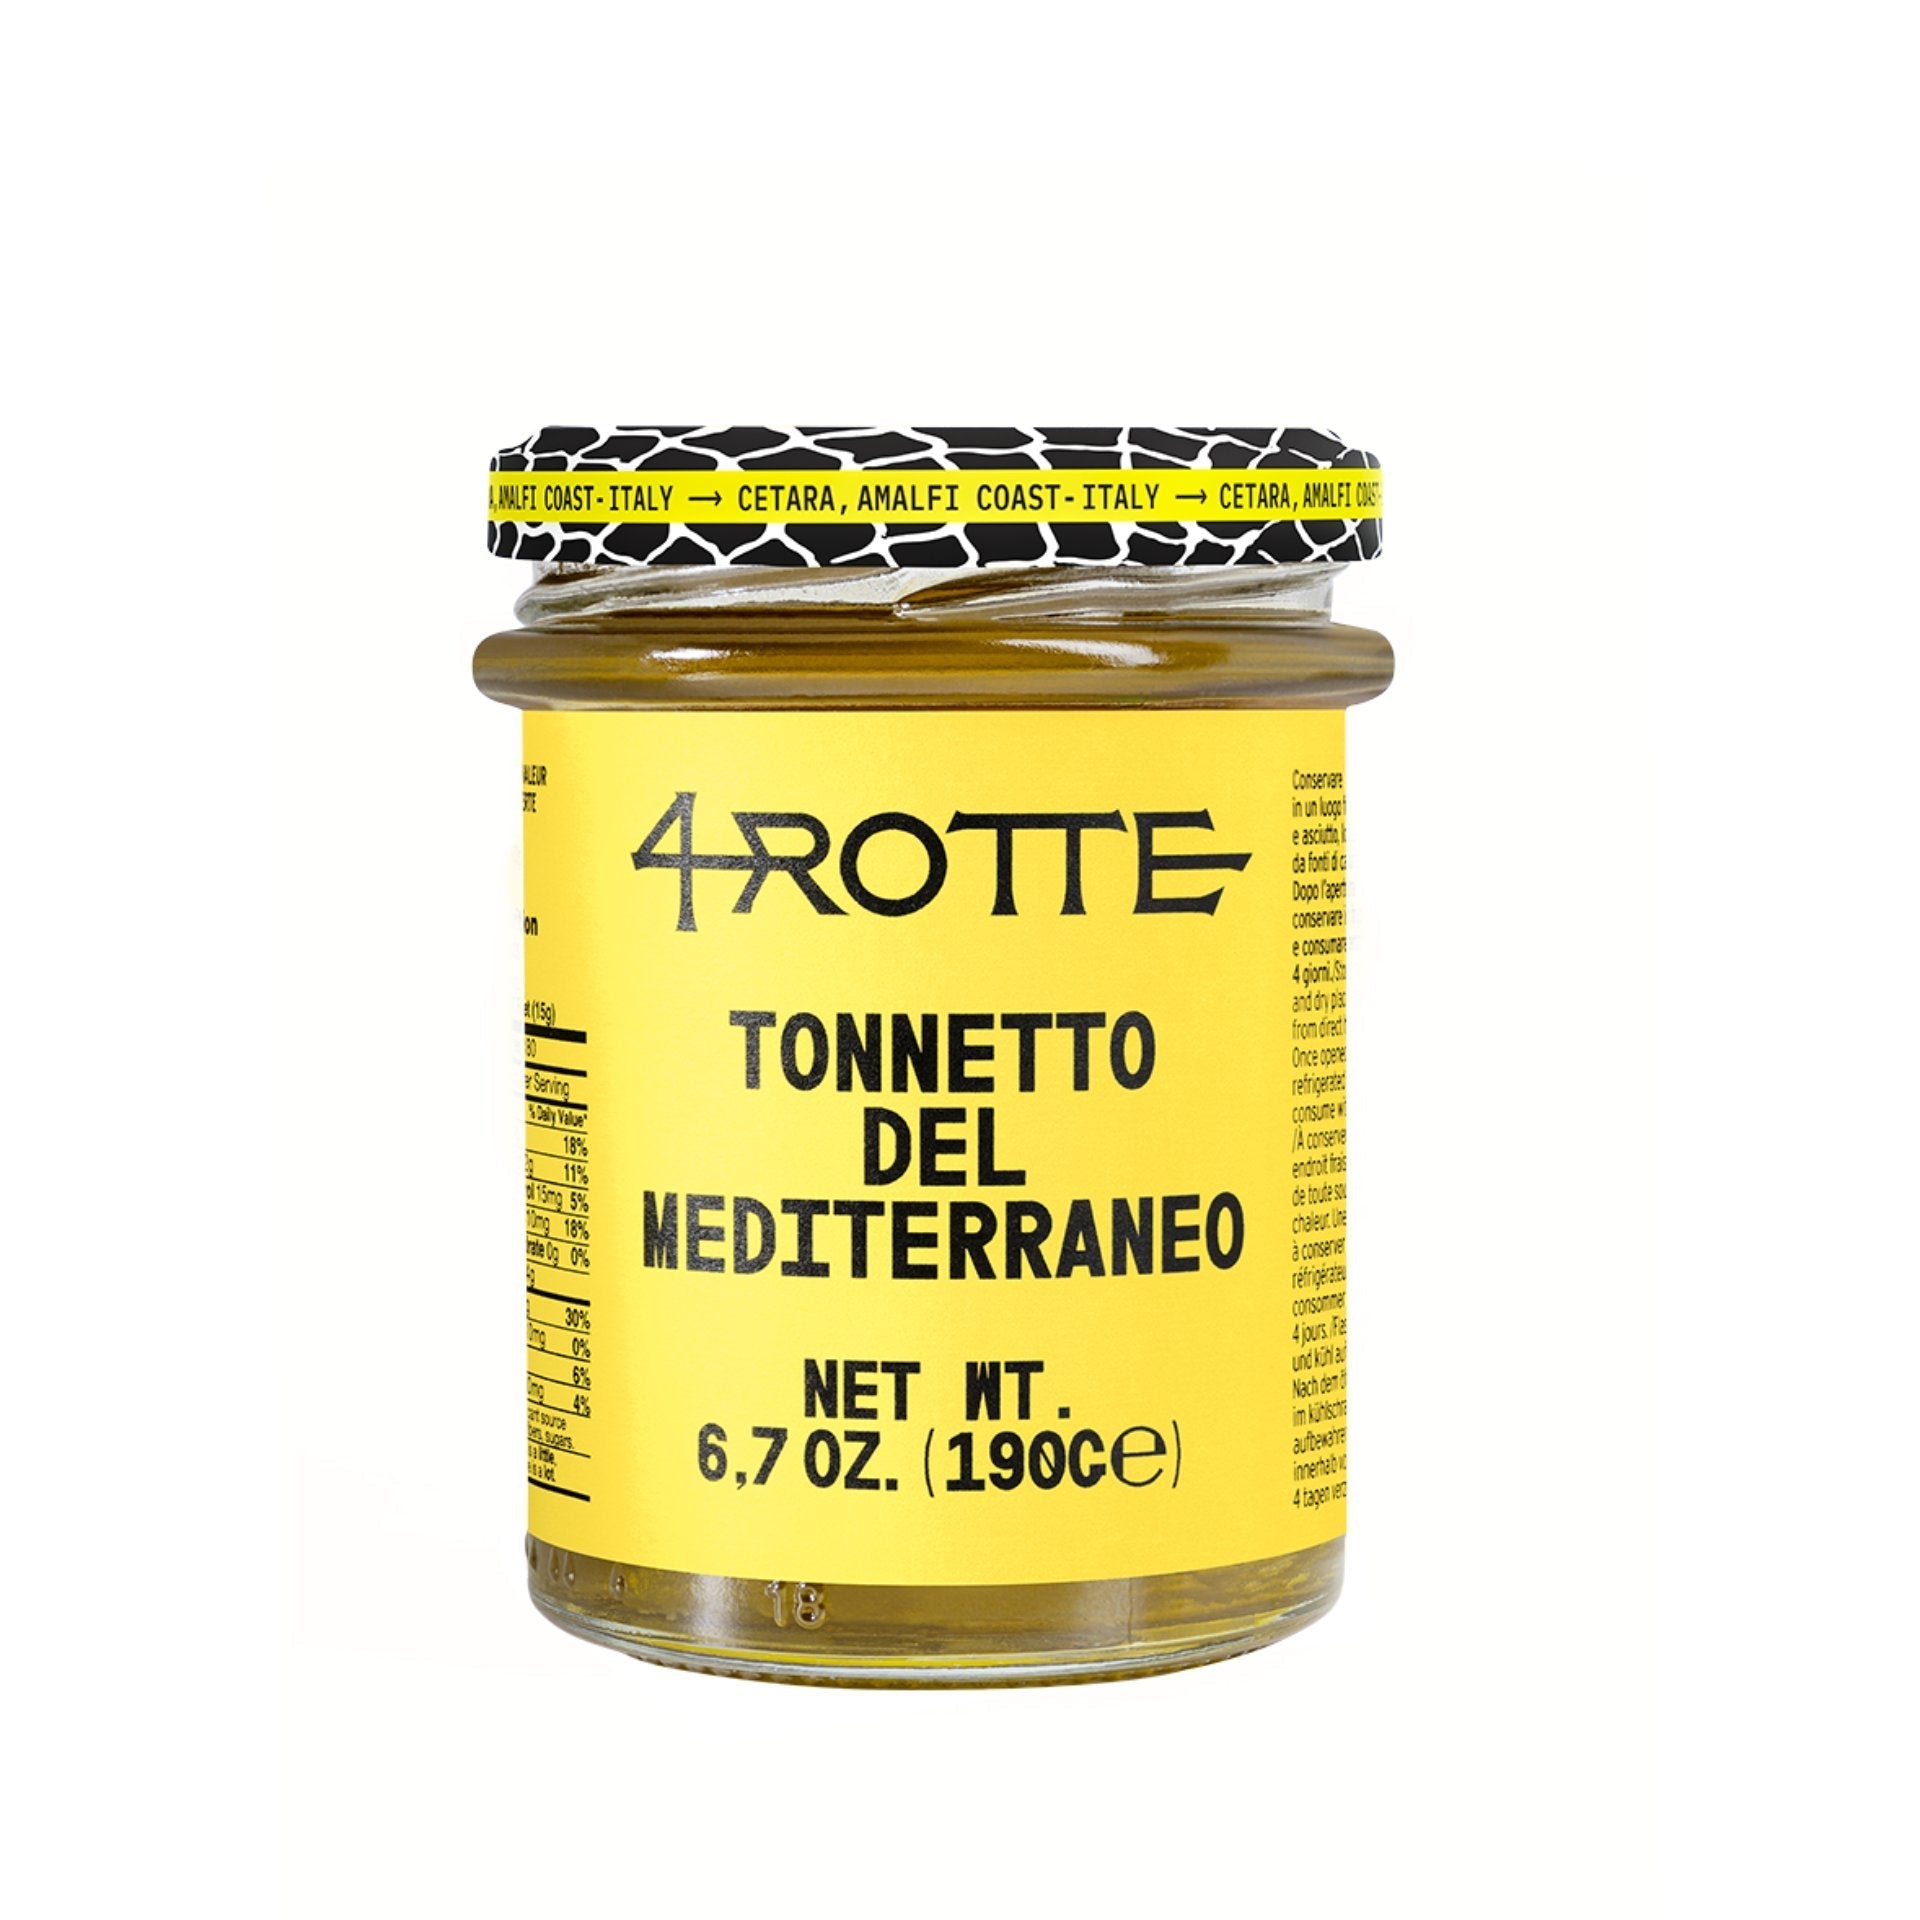 Armatore 4 Rotte Little Tunny Tuna Fillets in Olive Oil 190g  | Imported and distributed in the UK by Just Gourmet Foods